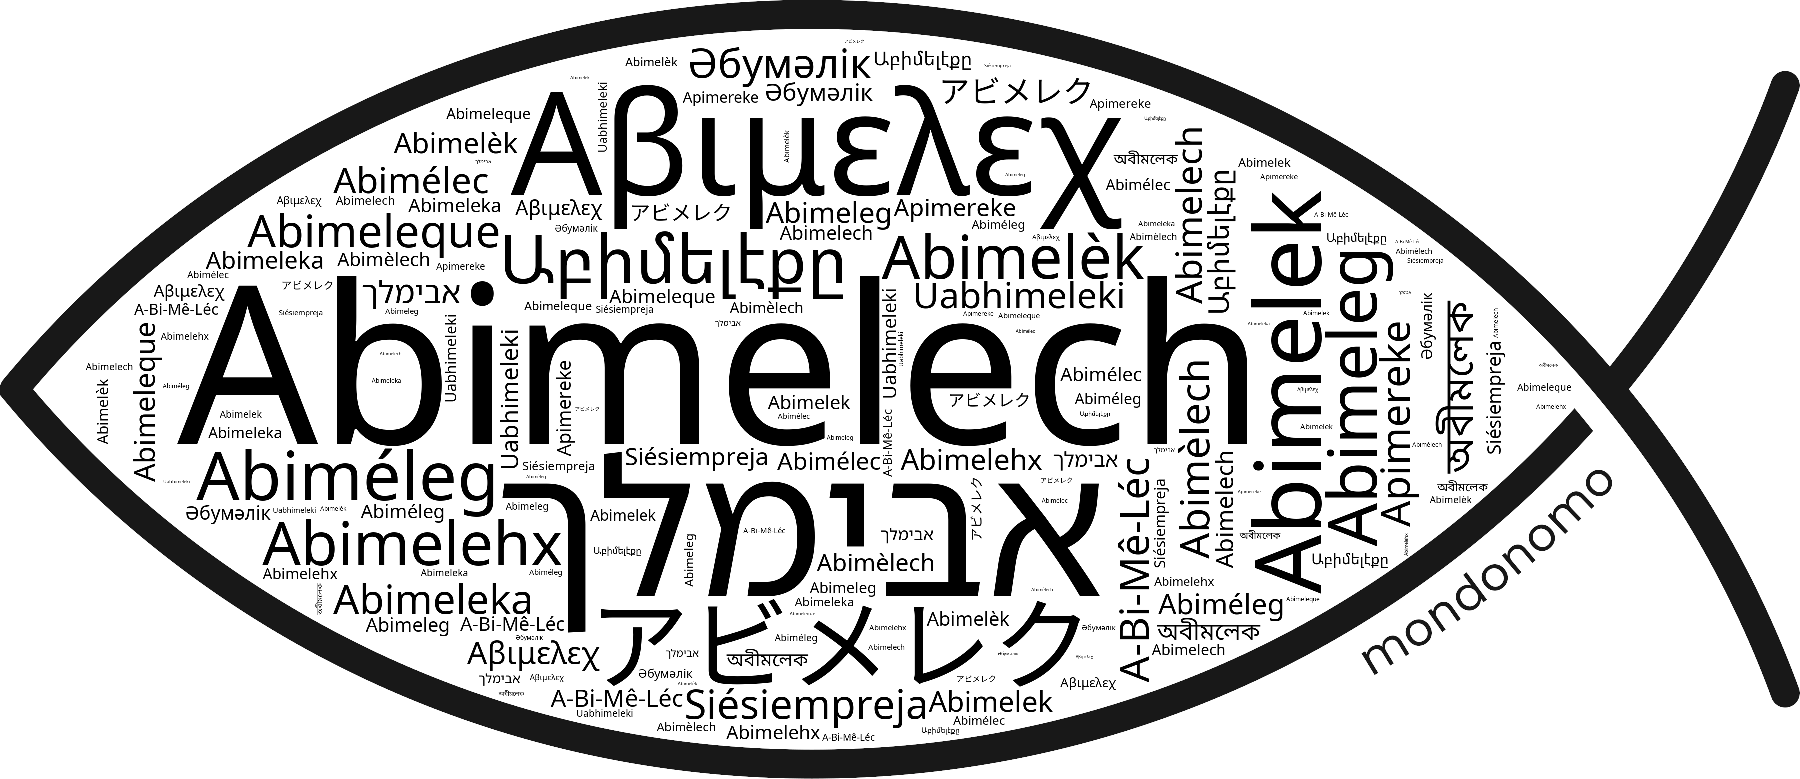 Name Abimelech in the world's Bibles